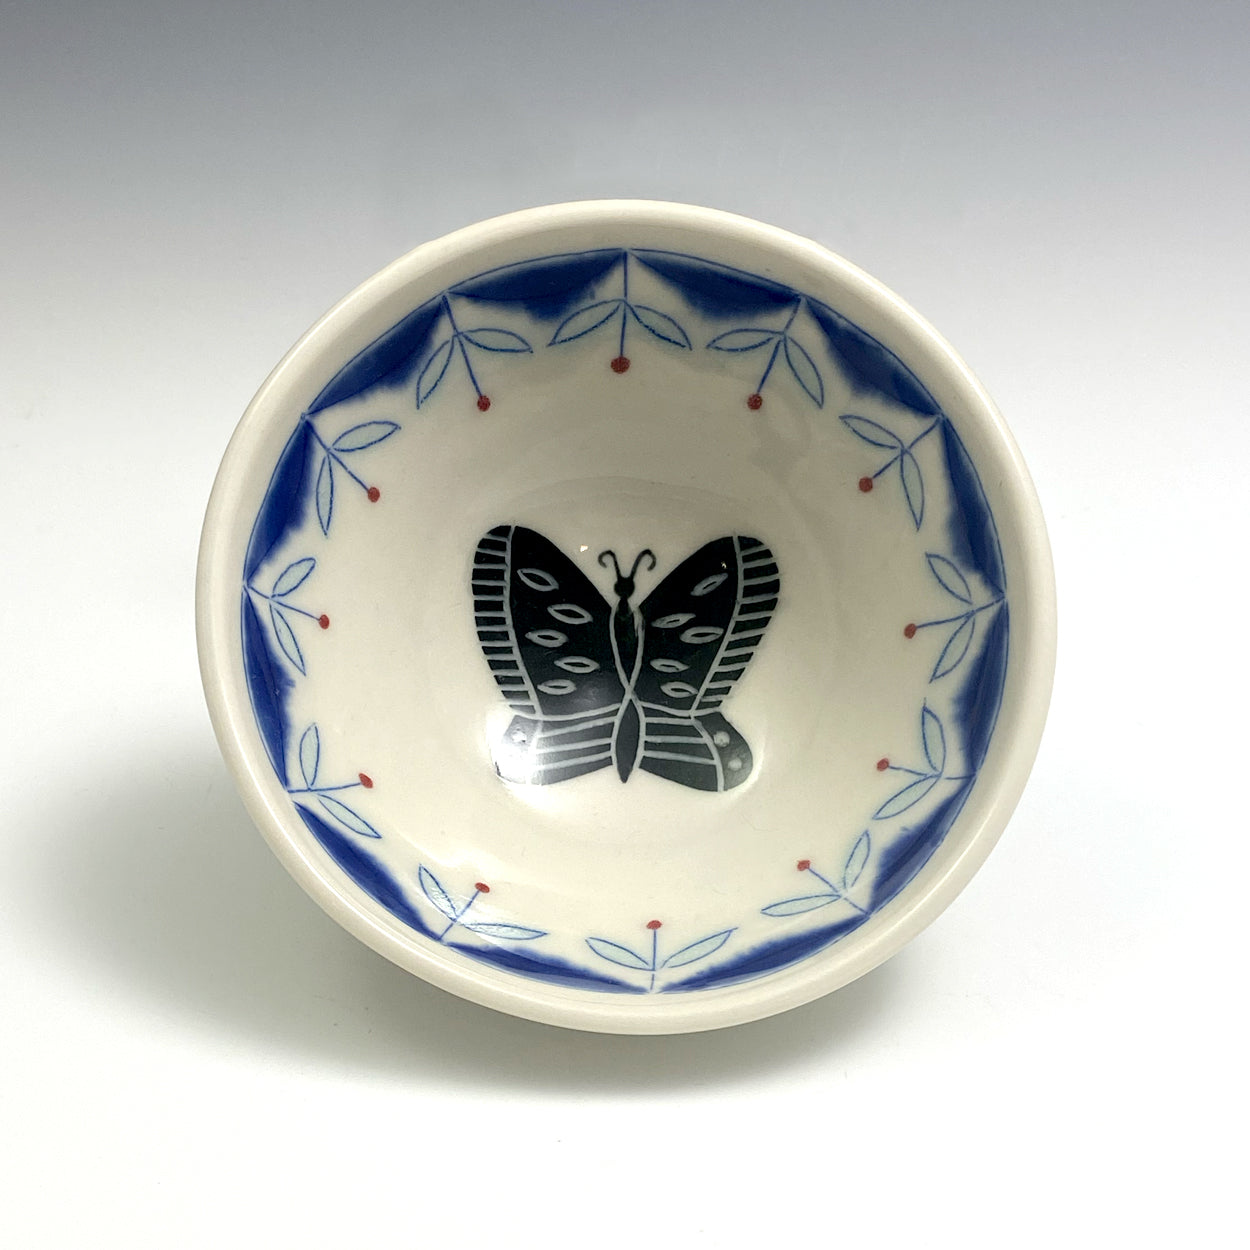 Small bowl with black butterfly 04 – Asta Joana Design